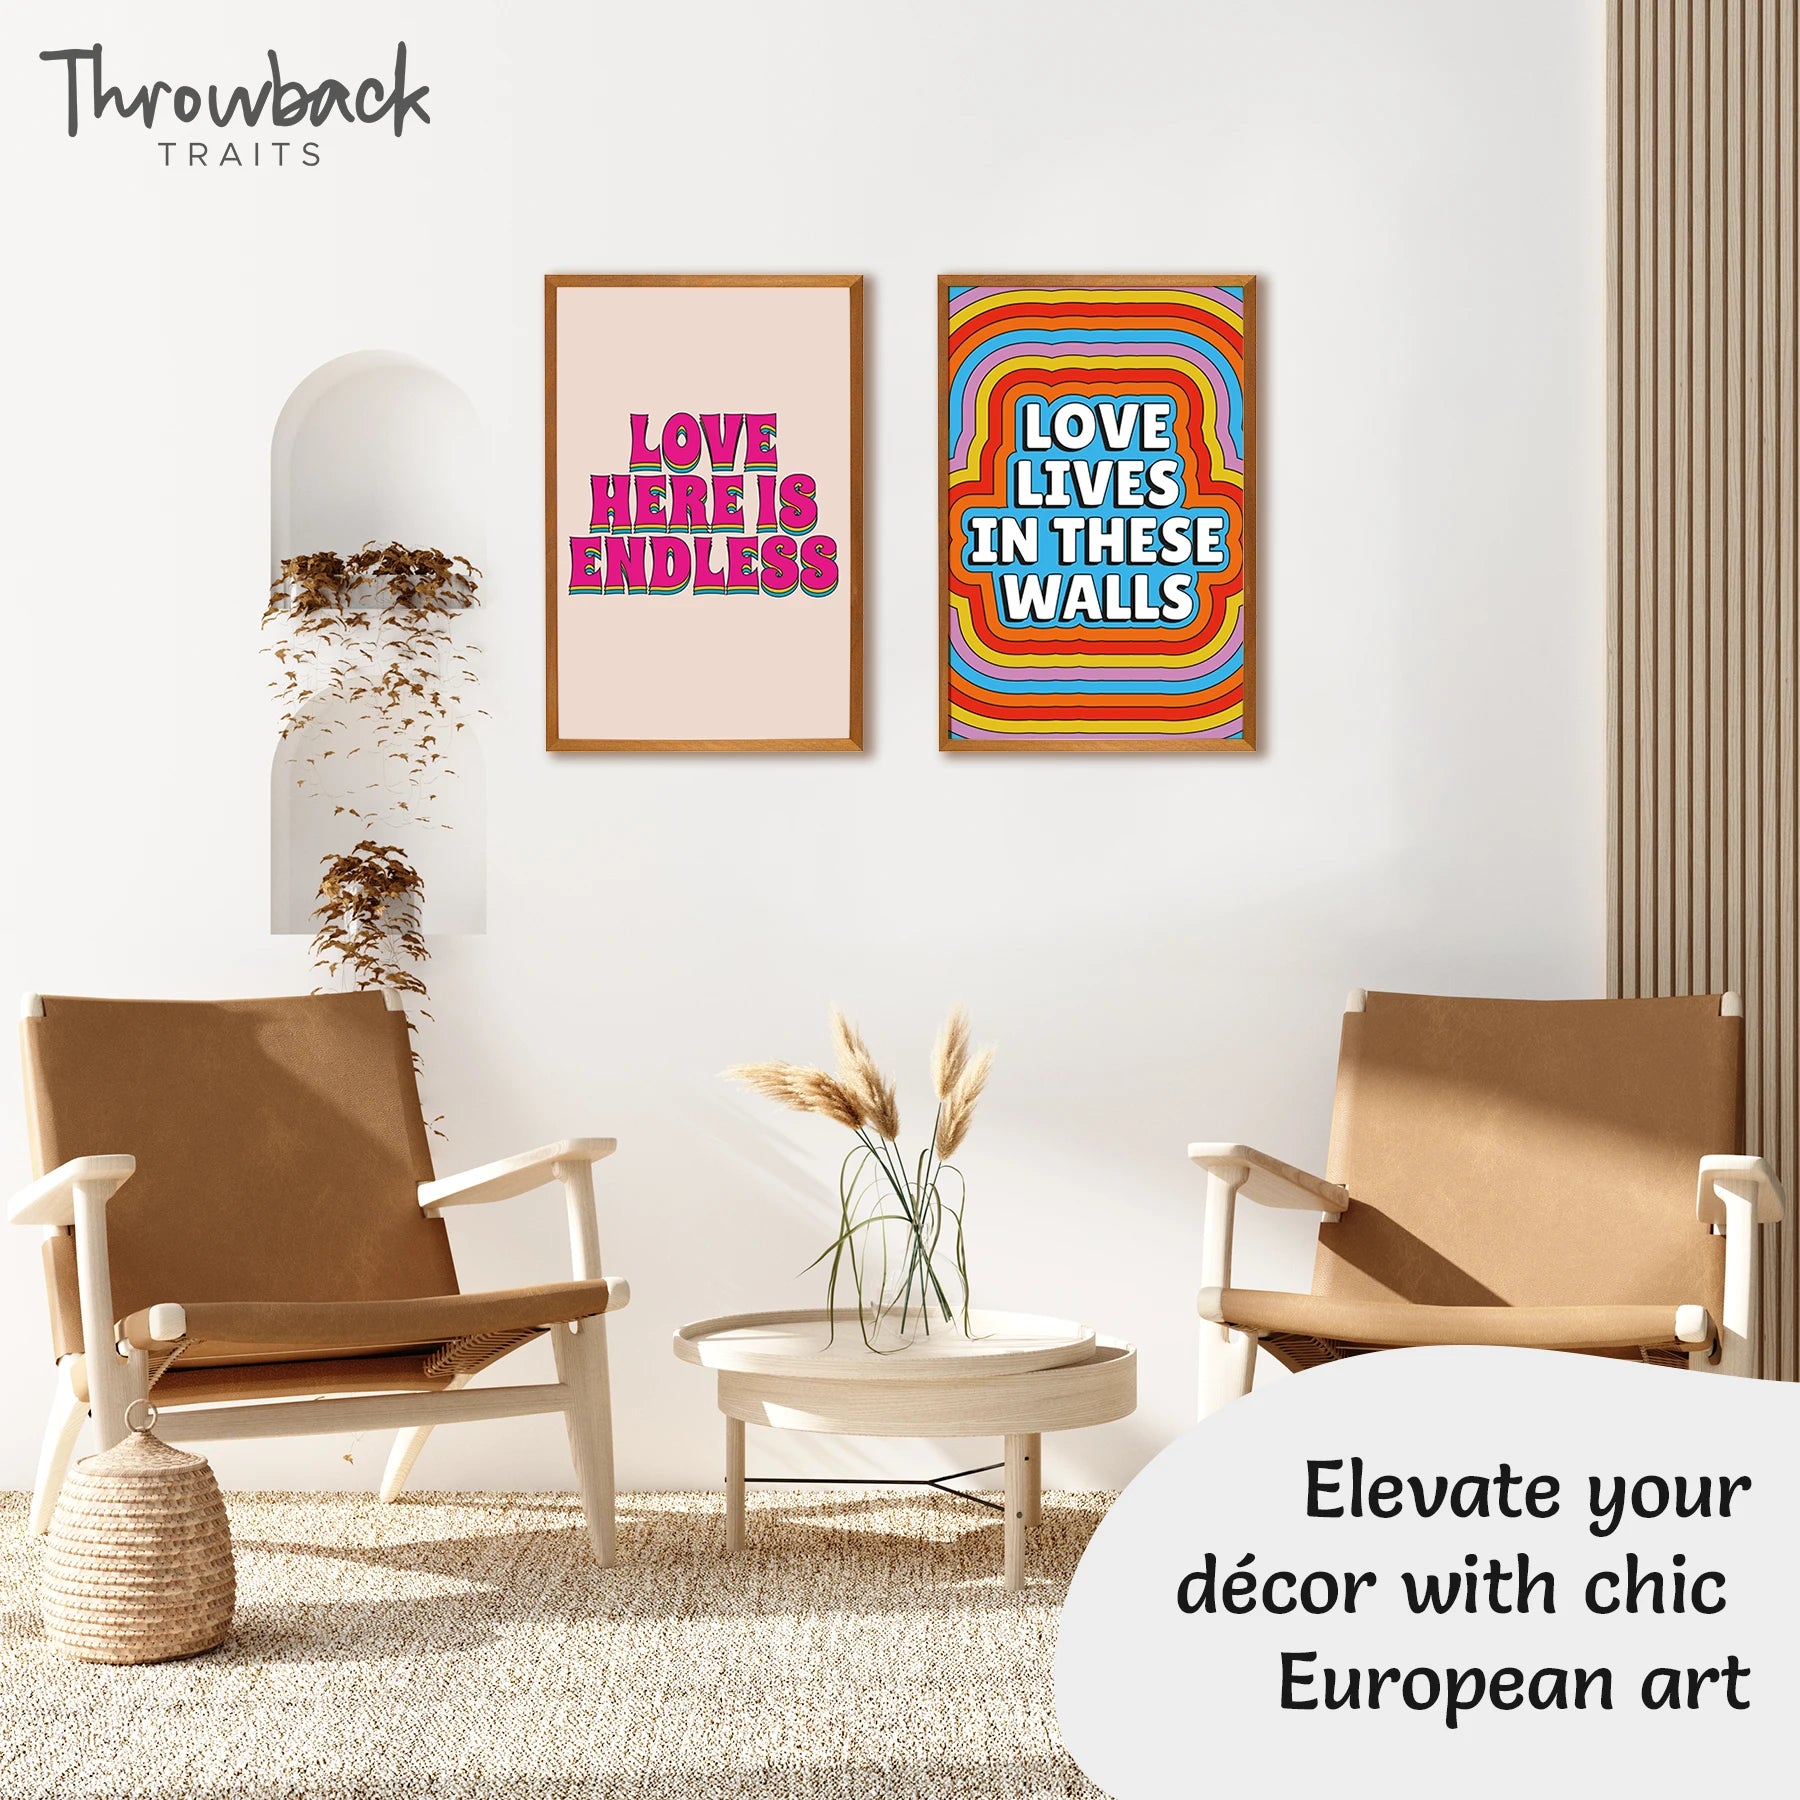 Funky Wall Art Posters - 11x17" (set of 6) – Throwback Traits